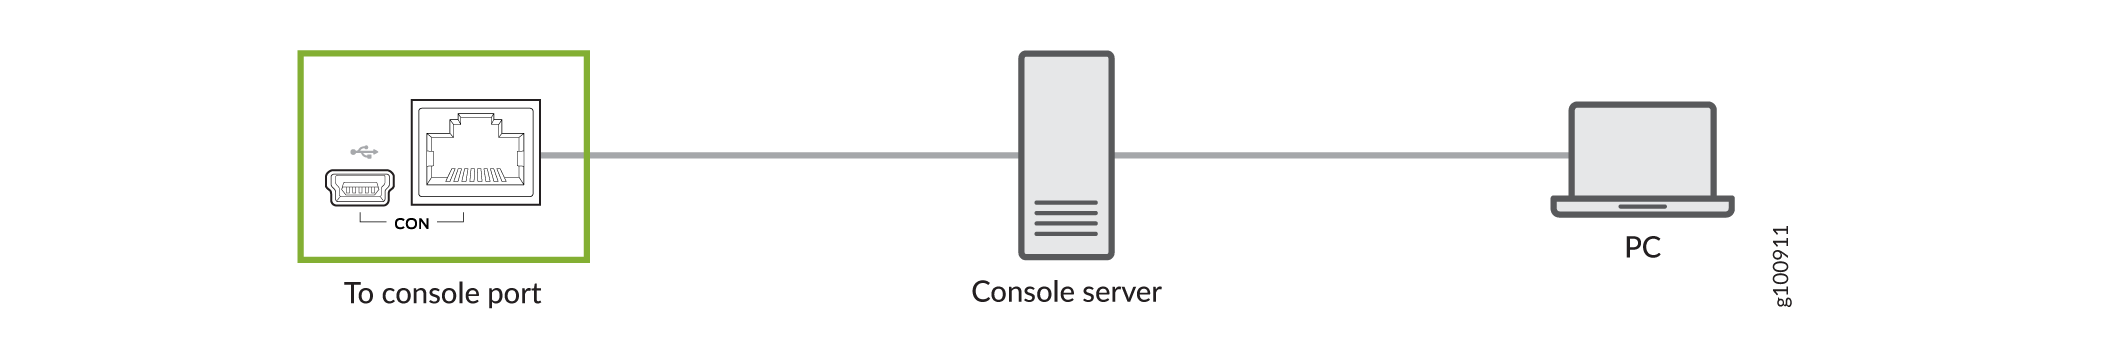 Connect the QFX5700 switch to a Management Console Through a Console Server